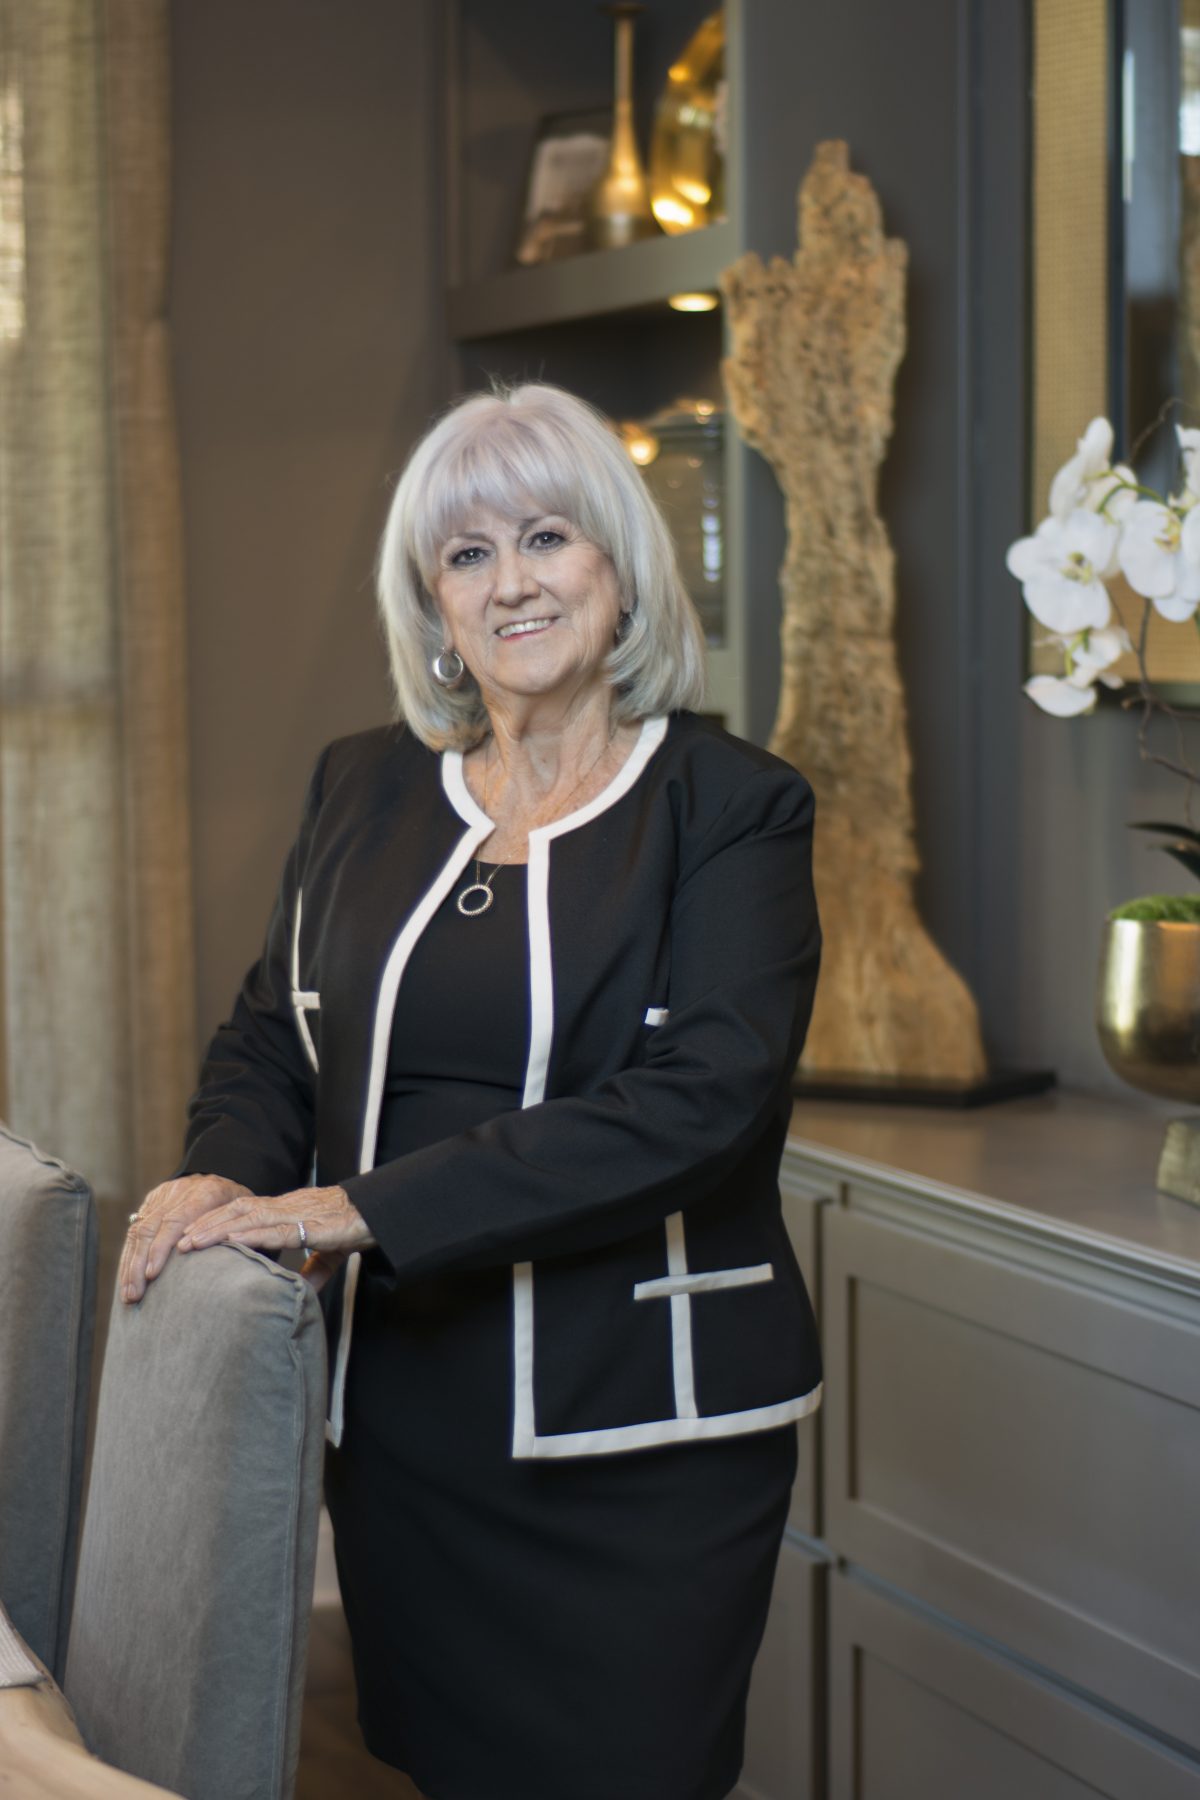 Jeannie Dalmolin as your guide, navigating the Texas real estate